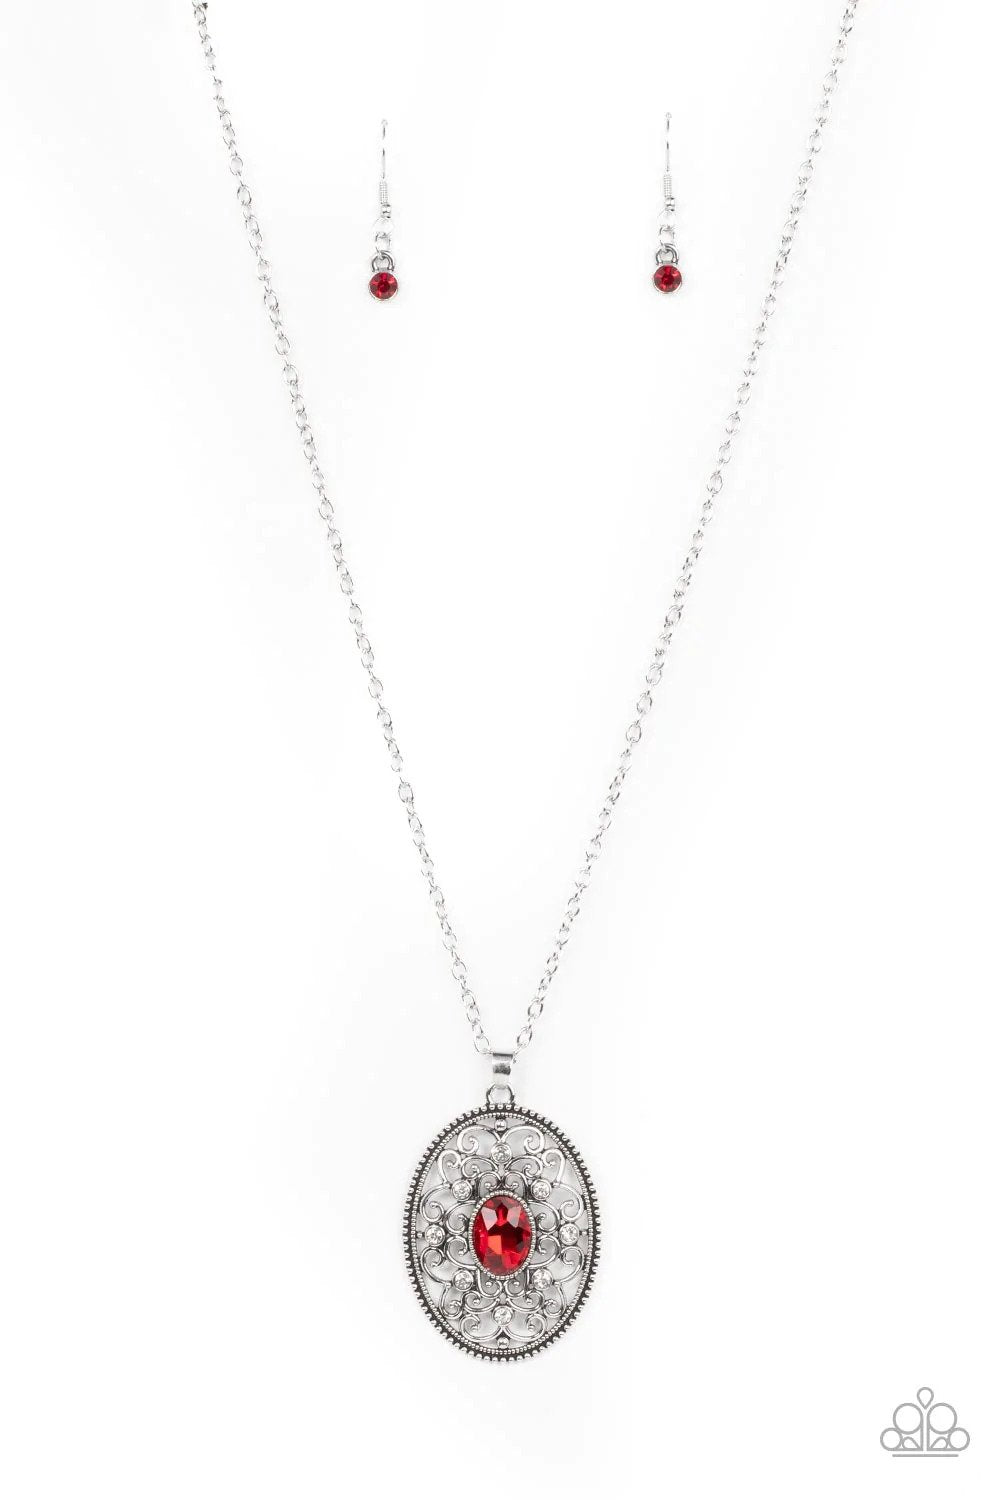 Sonata Swing Red Necklace - Paparazzi Accessories- lightbox - CarasShop.com - $5 Jewelry by Cara Jewels